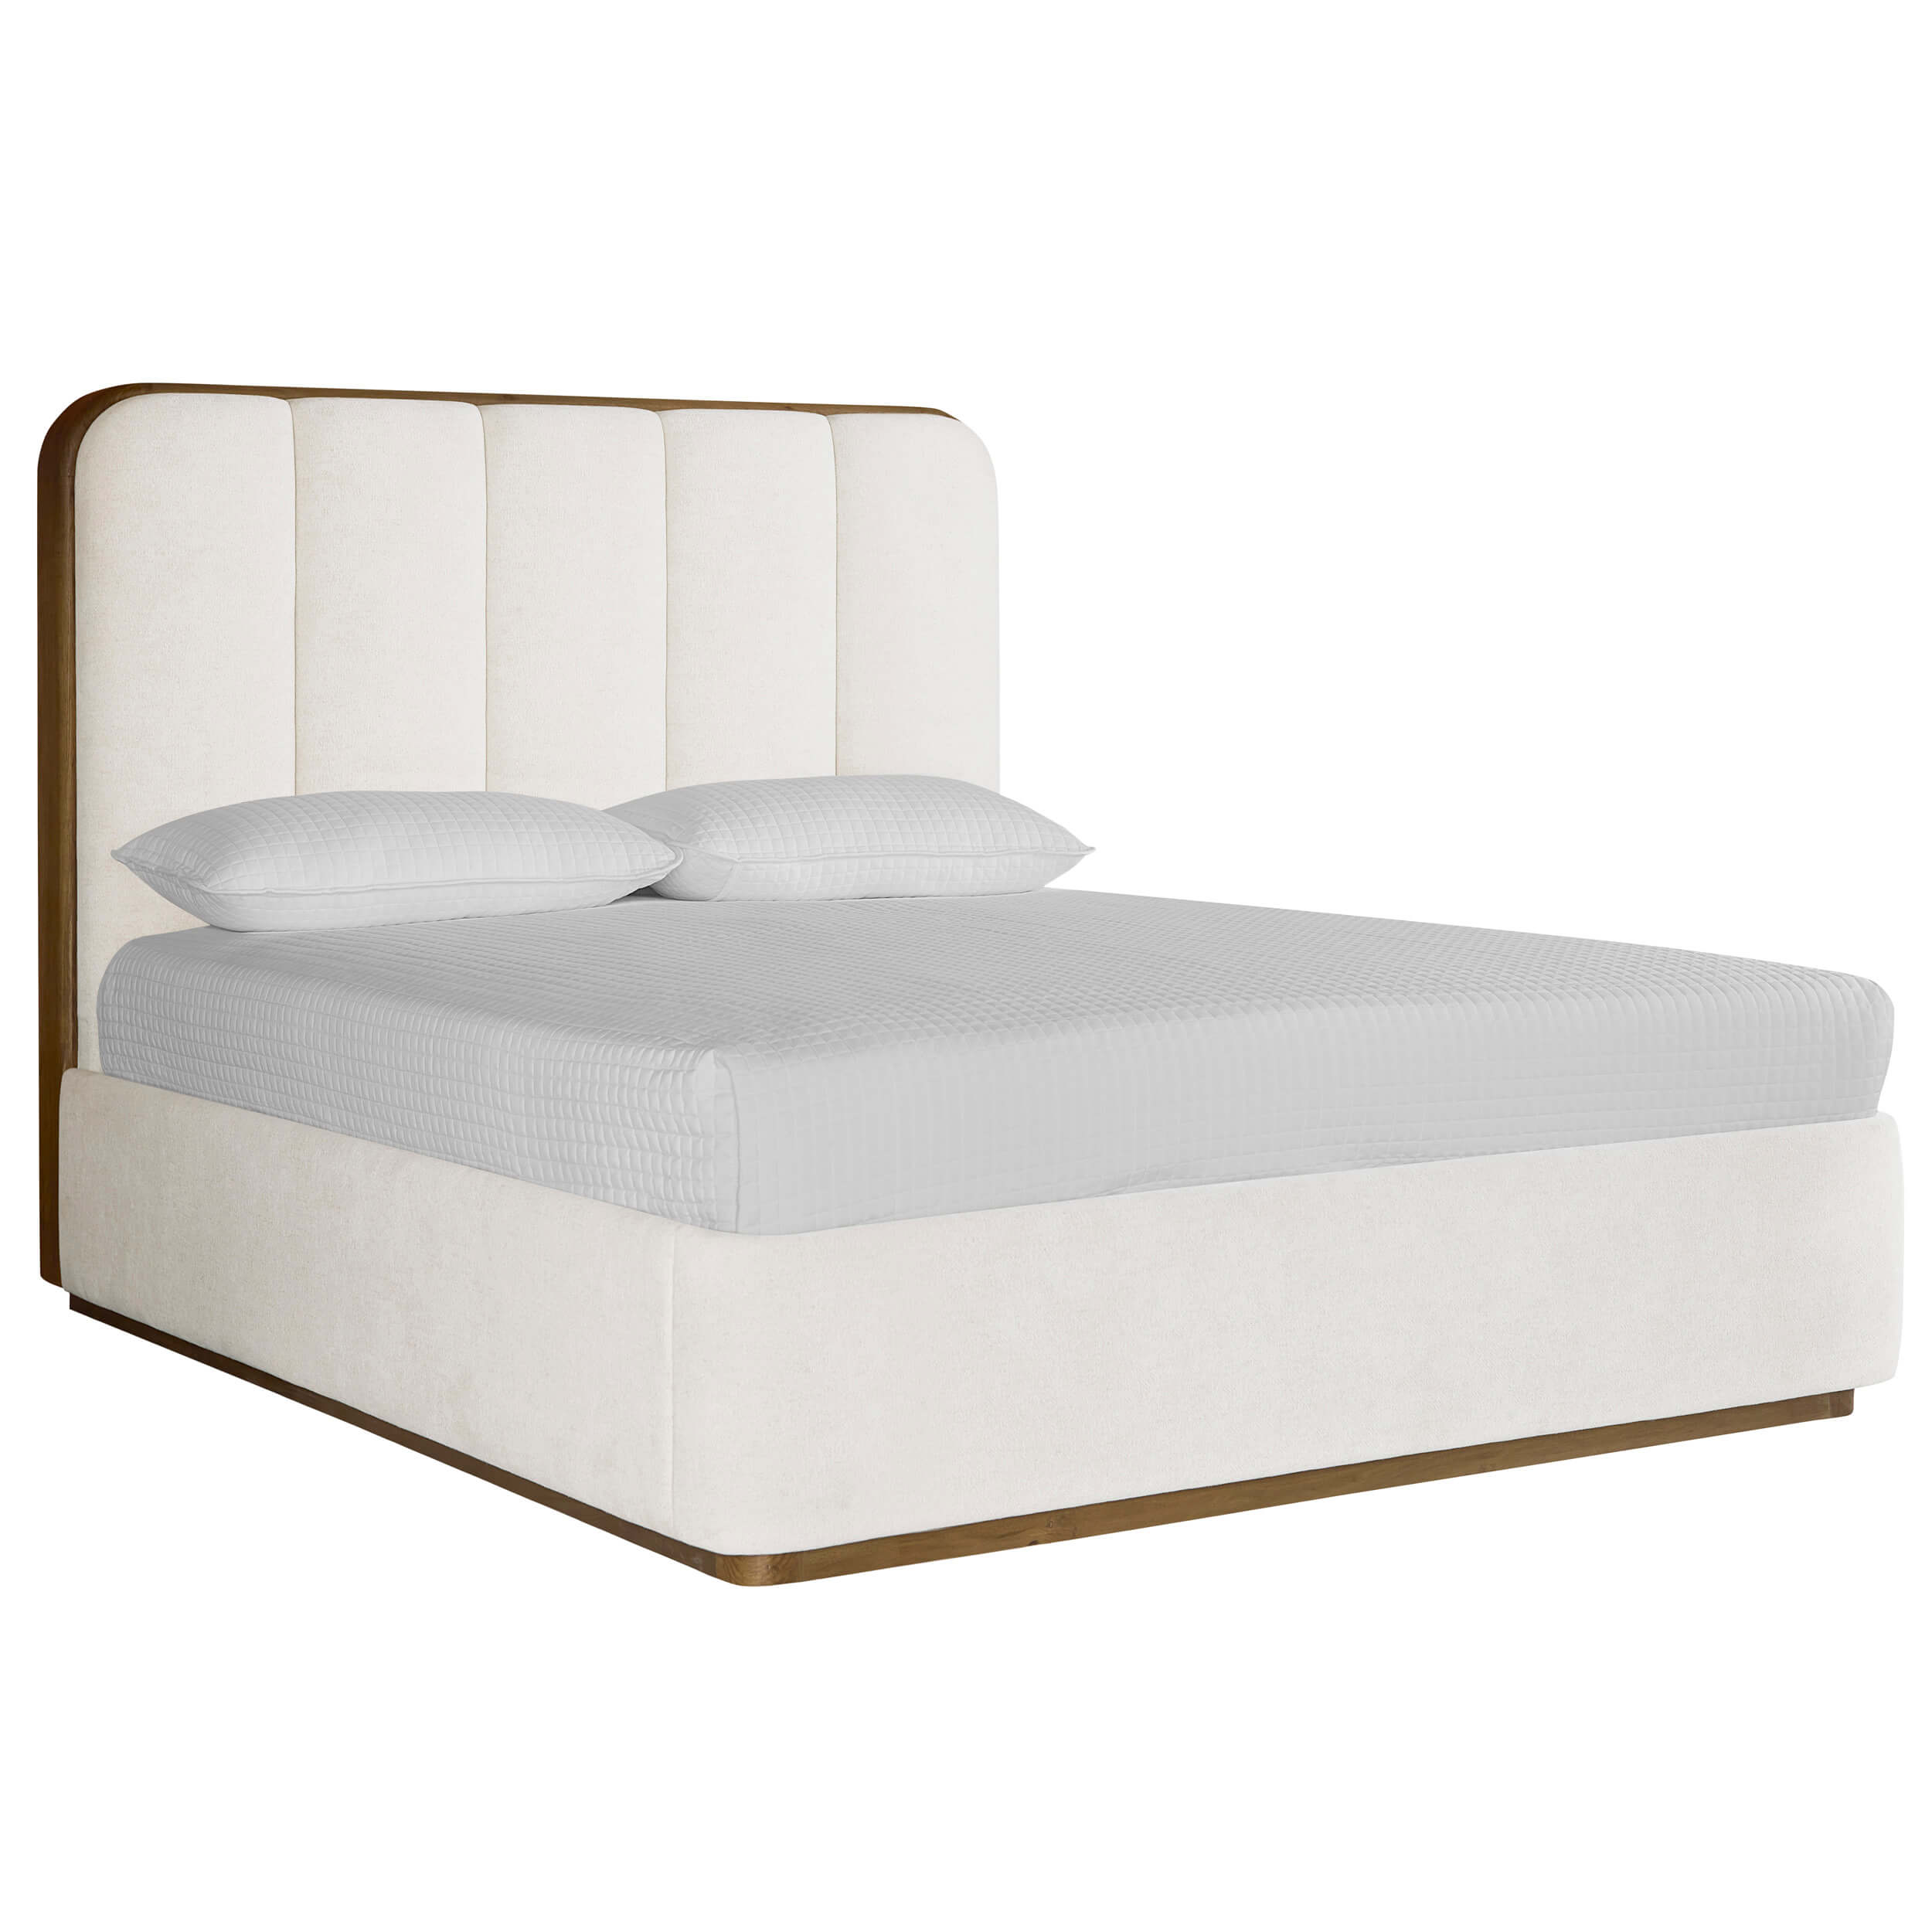 Image of Jamille Bed, Eclipse White